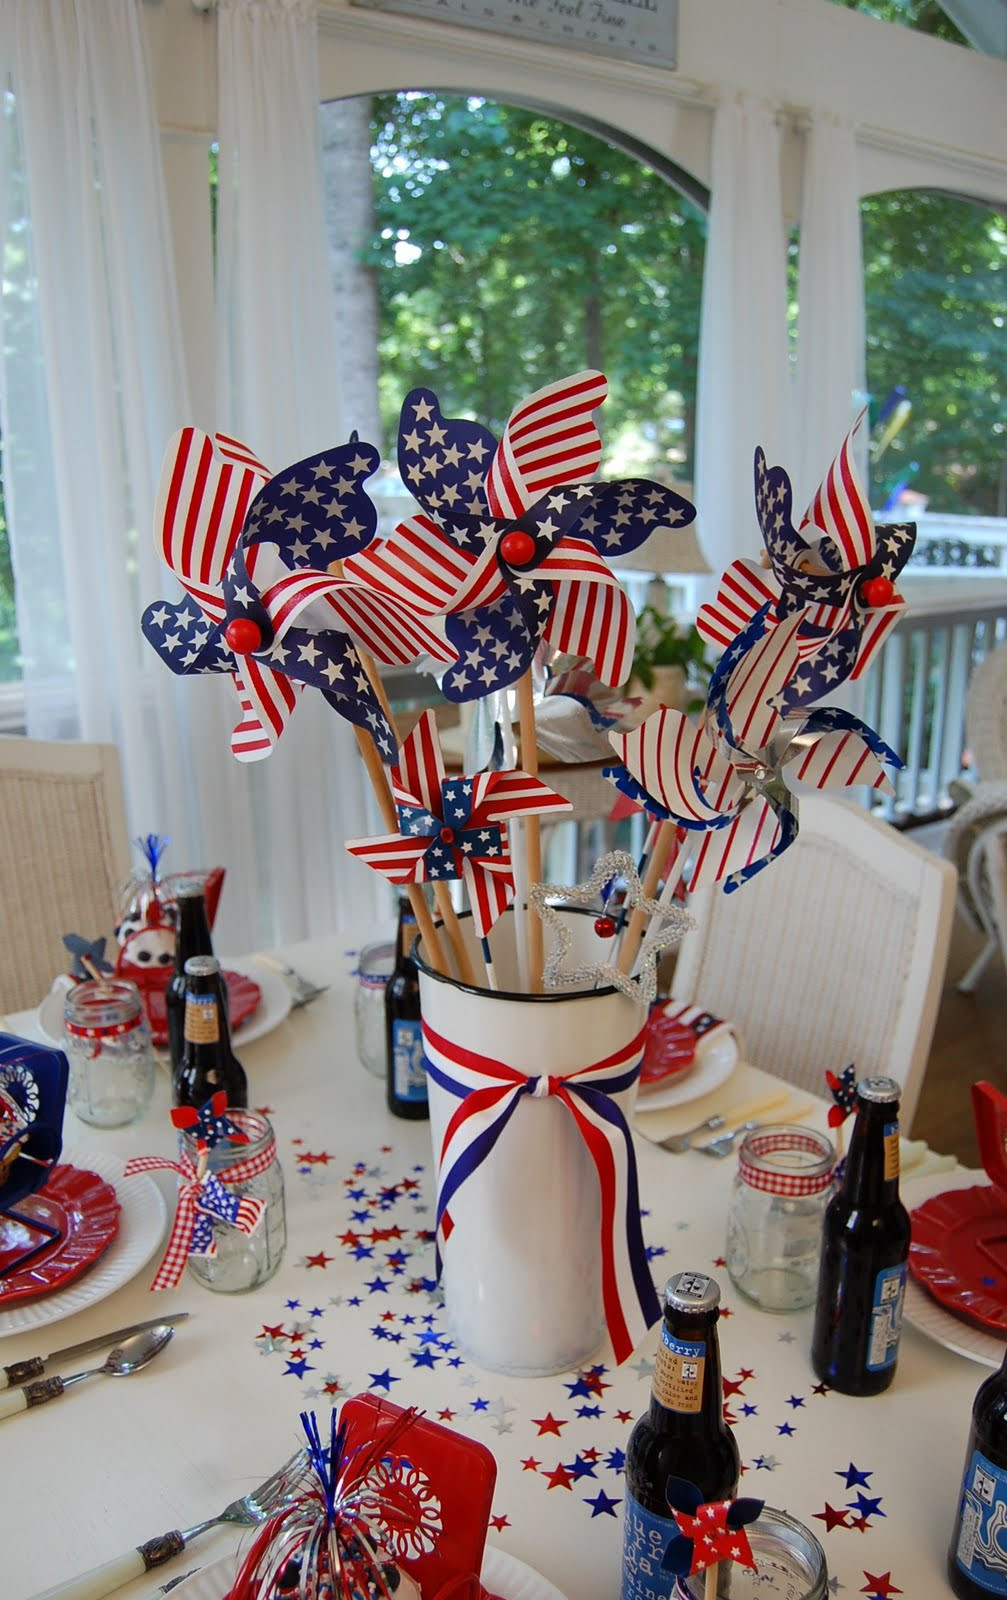 4th Of July Decoration Ideas
 A Patriotic Celebration Table Setting